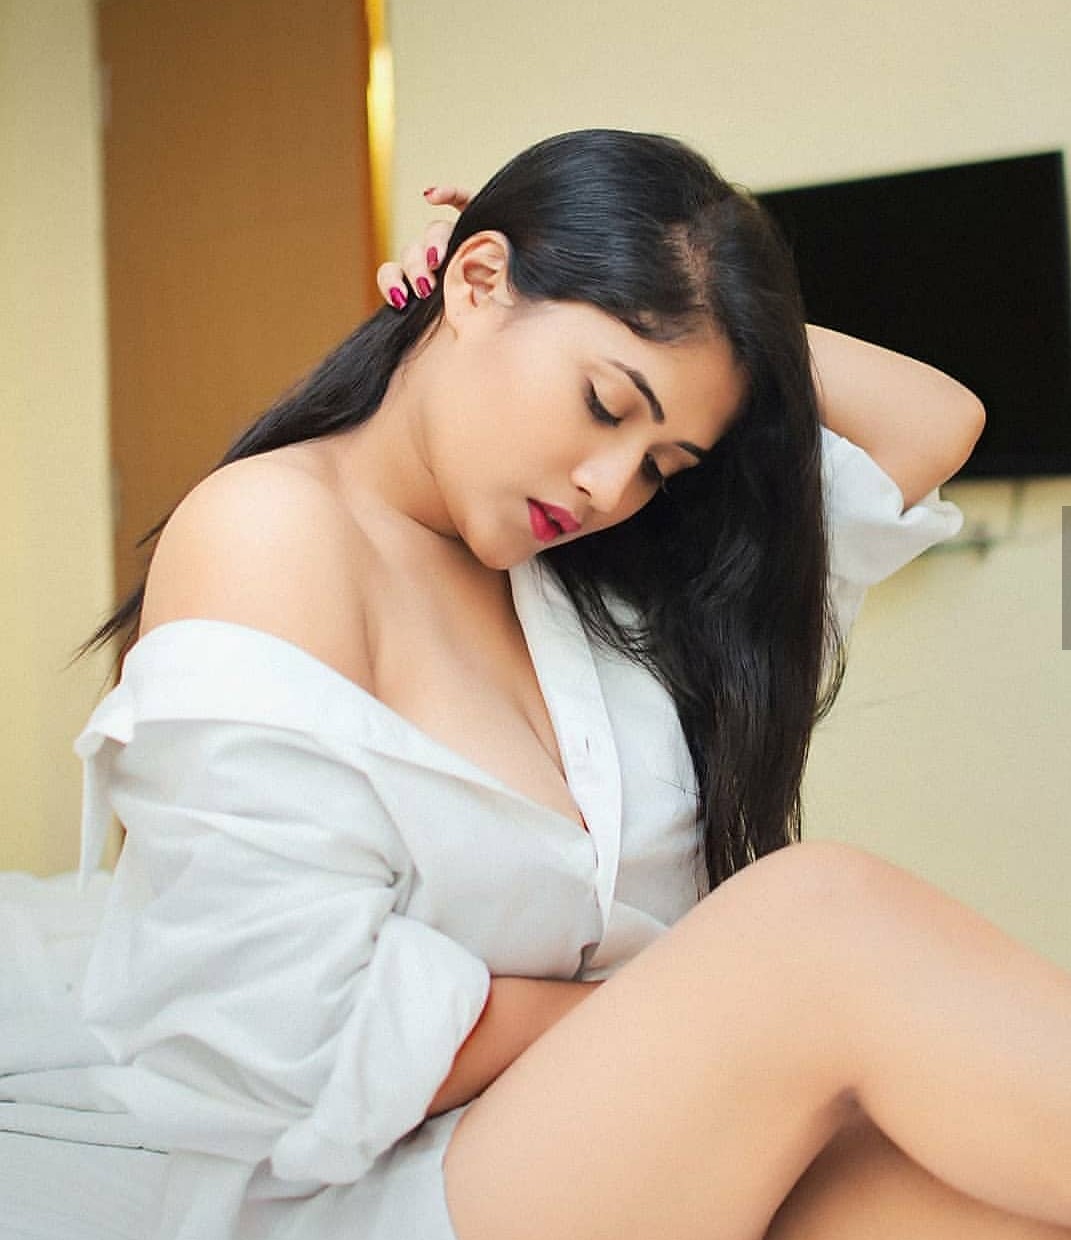 Call girls in delhi 9711168618 Welcome To Vip Escort Services In Delhi,South West Delhi,Others,Free Classifieds,Post Free Ads,77traders.com